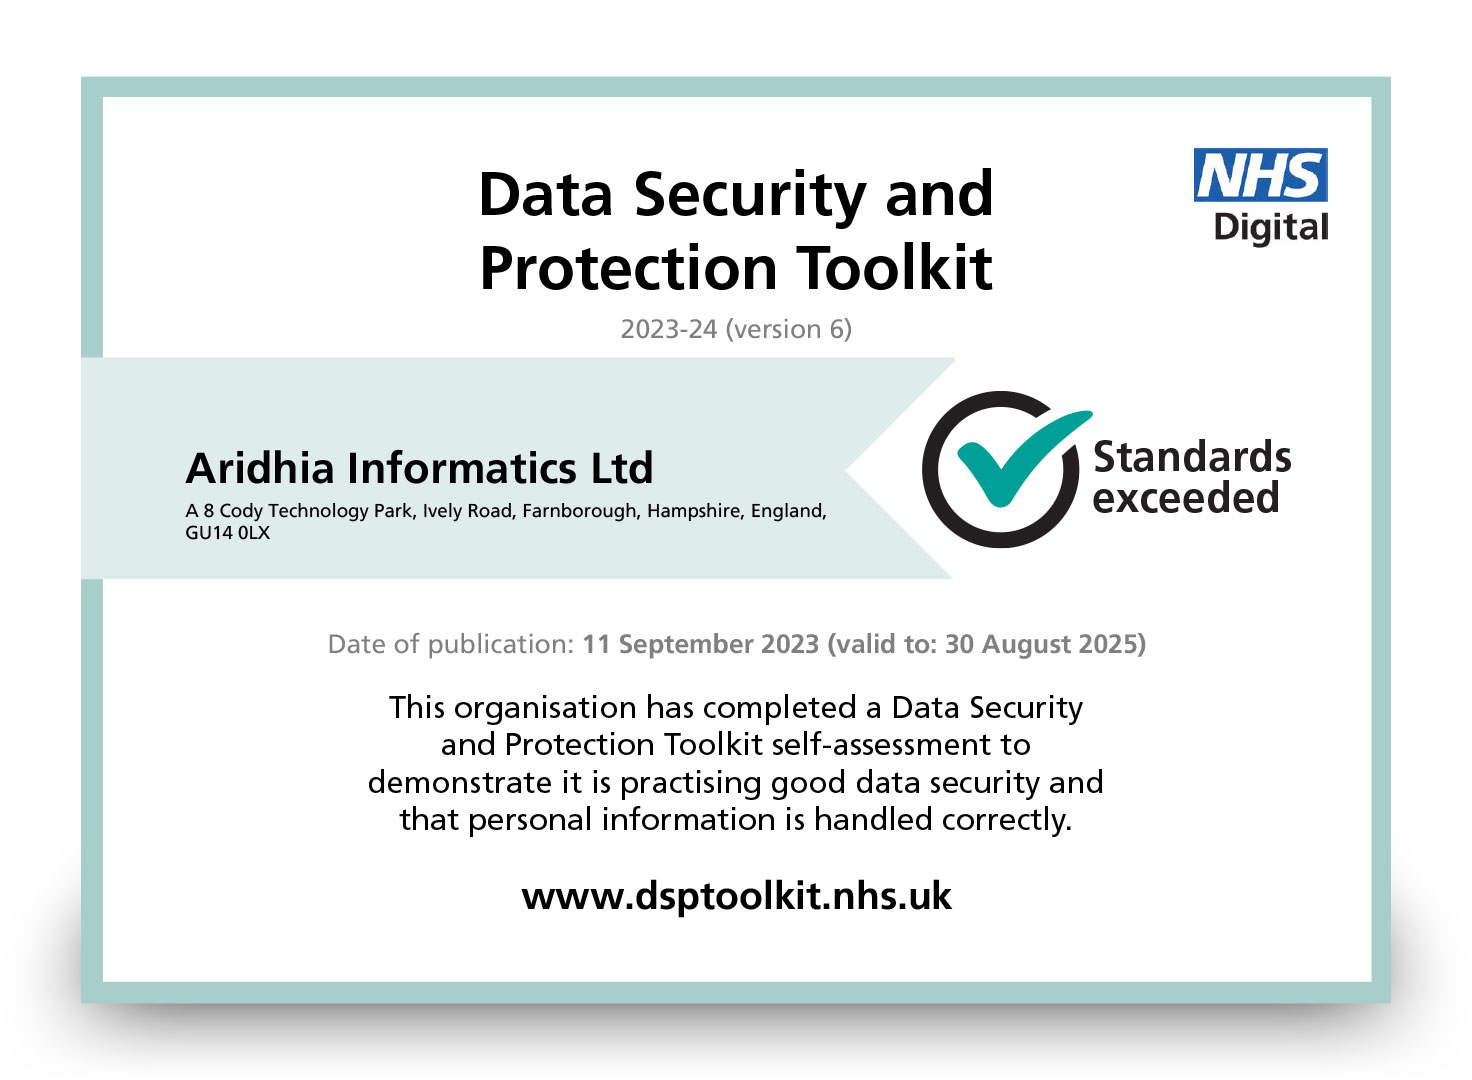 NHS Data Security and Protection Toolkit